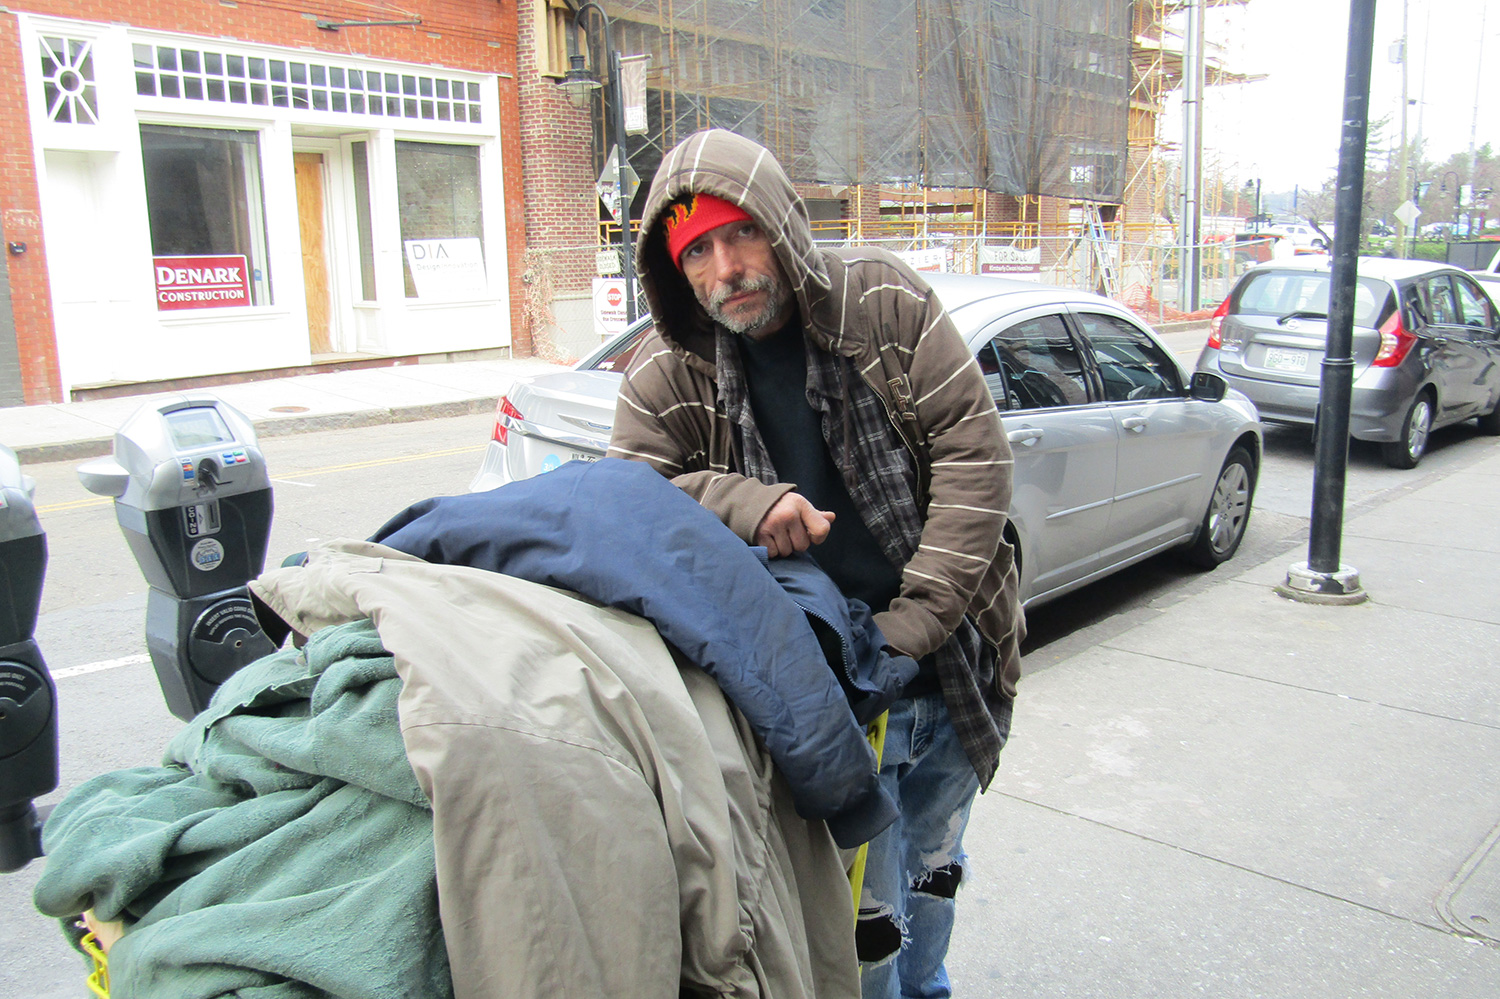 Photograph of a homeless man with a cart. The background is a city street with parked cars.